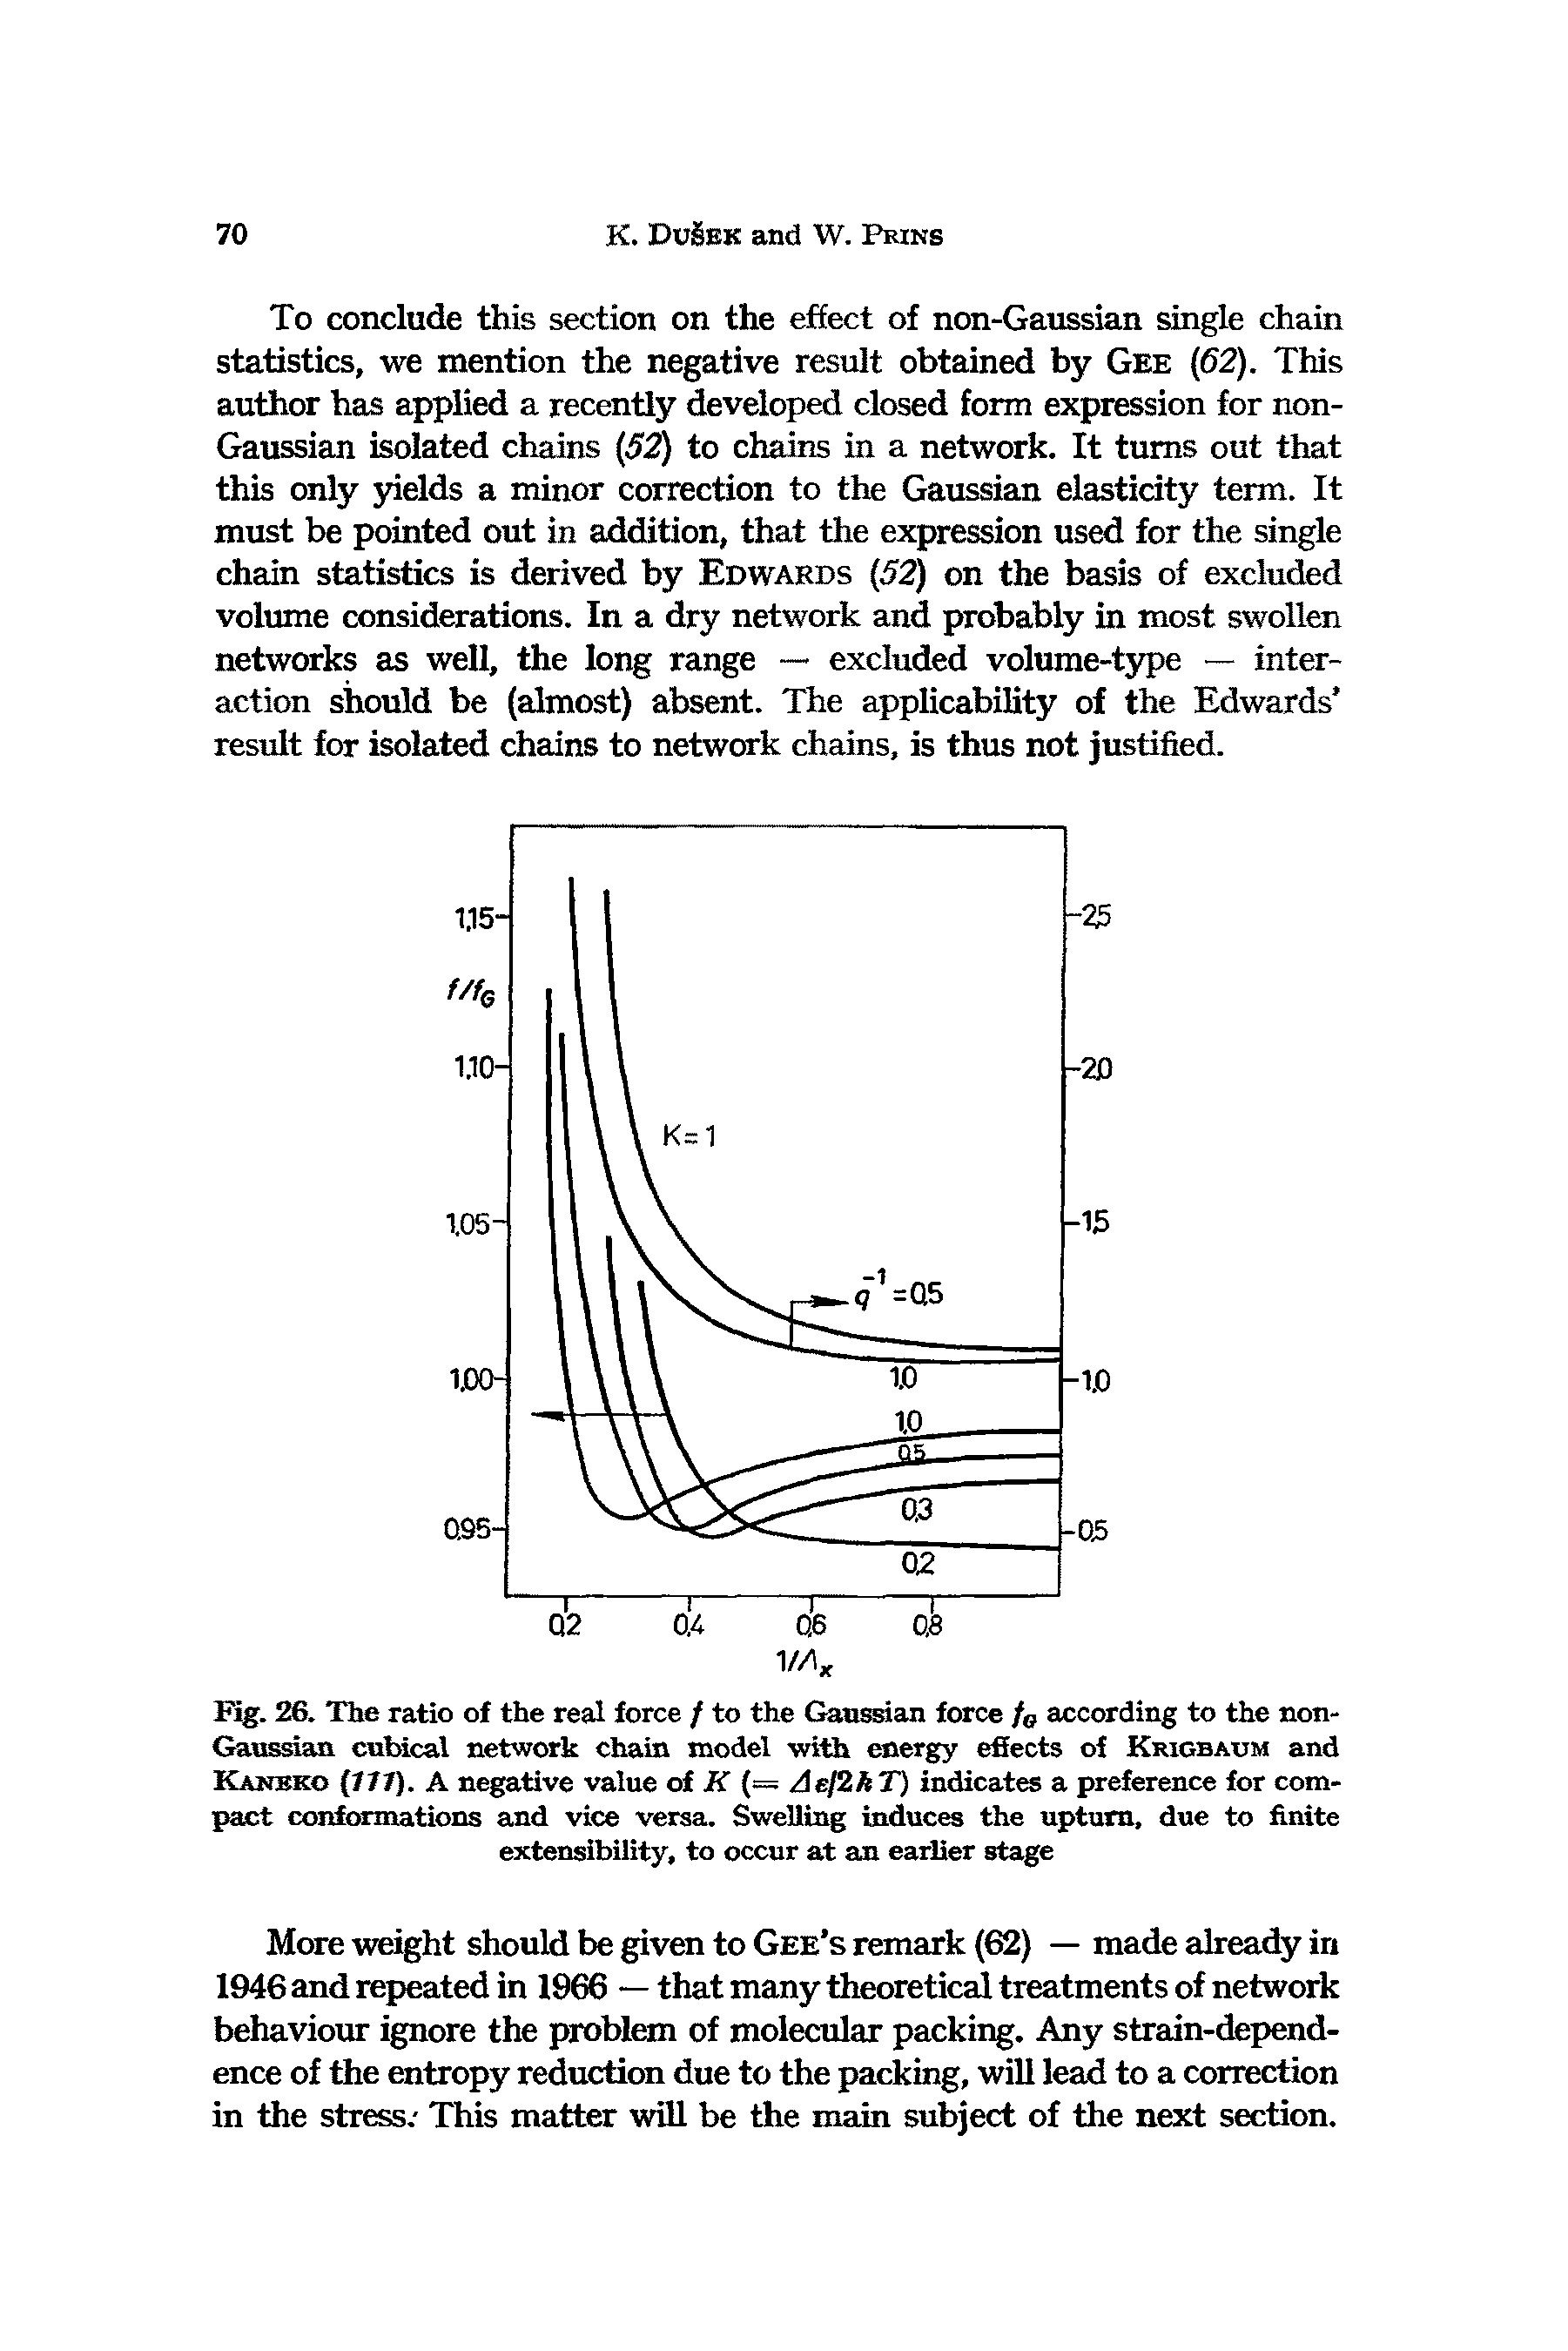 Fig. 26. The ratio of the real force / to the Gaussian force fB according to the non-Gaussian cubical network chain model with energy effects of Krigbaum and Kanbko (171). A negative value of K (= Aej lhT) indicates a preference for compact conformations and vice versa. Swelling induces the upturn, due to finite extensibility, to occur at an earlier stage...